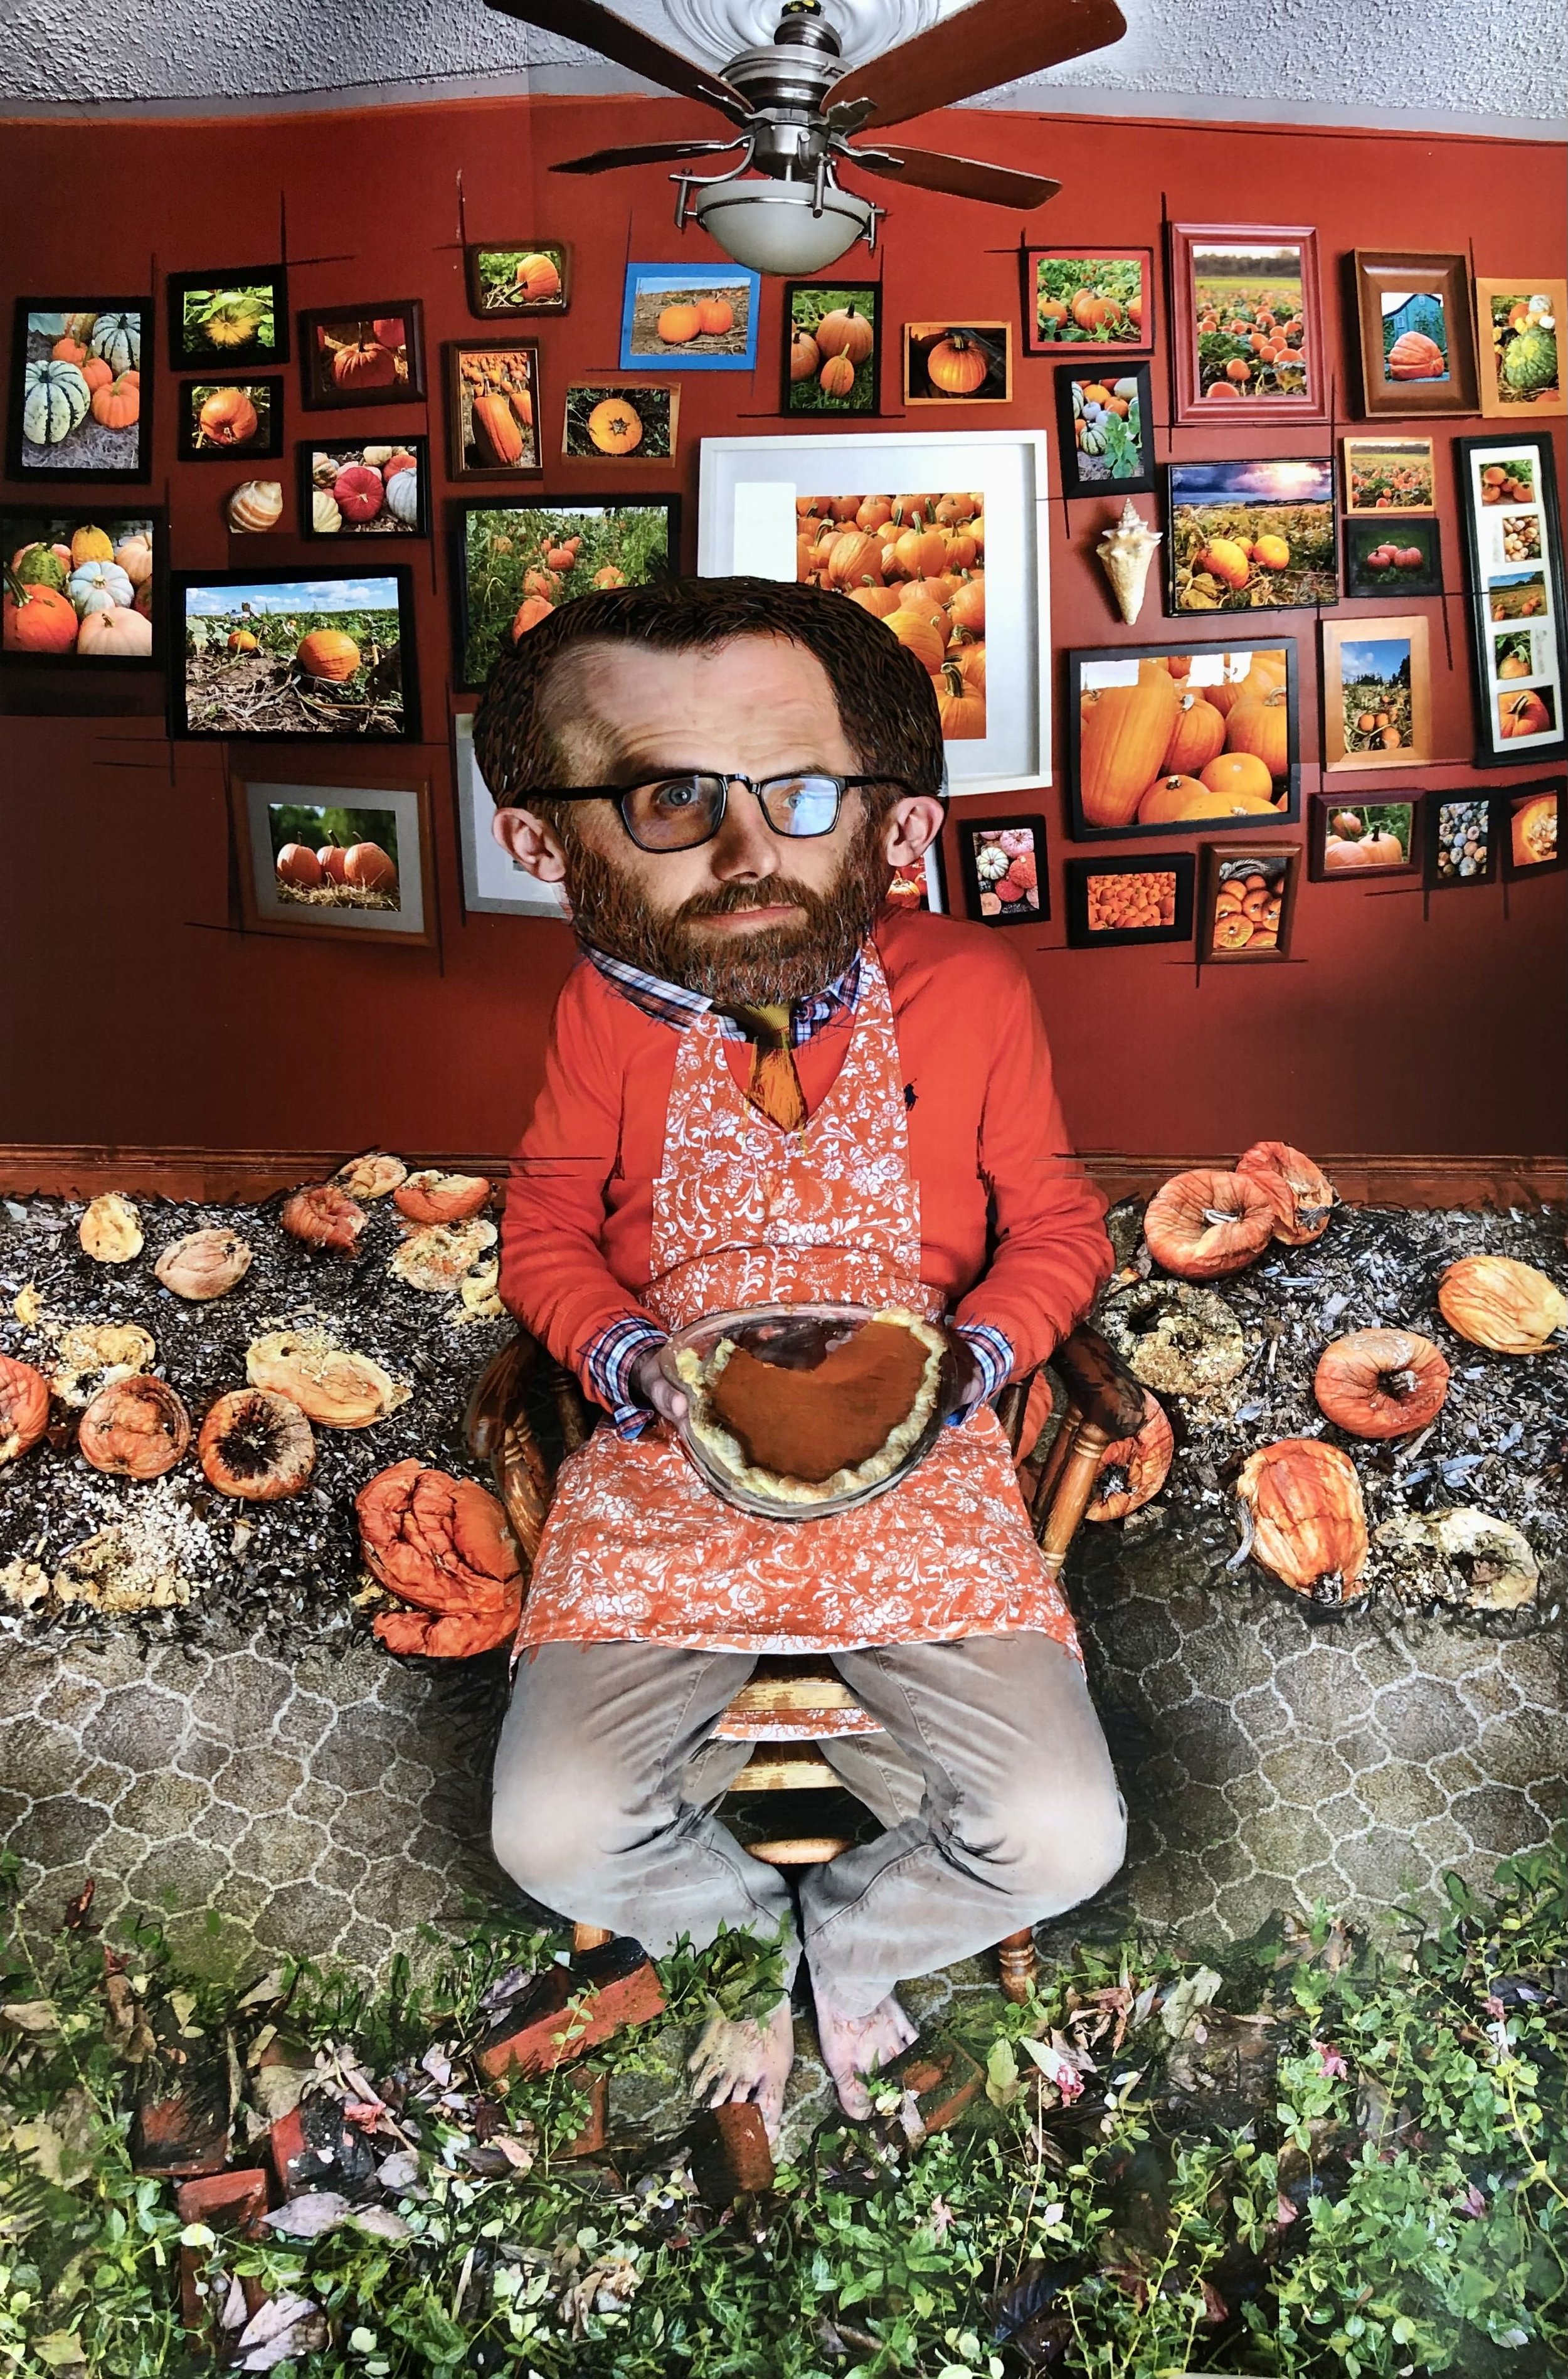   An image of Jason Bomers’ work, a photo collage of a man in an apron, holding a pumpkin pie. In the room he sits in, there’s a red wall filled with framed photos of pumpkins, he wears a red sweater vest, and his face is fragmented, with two images 